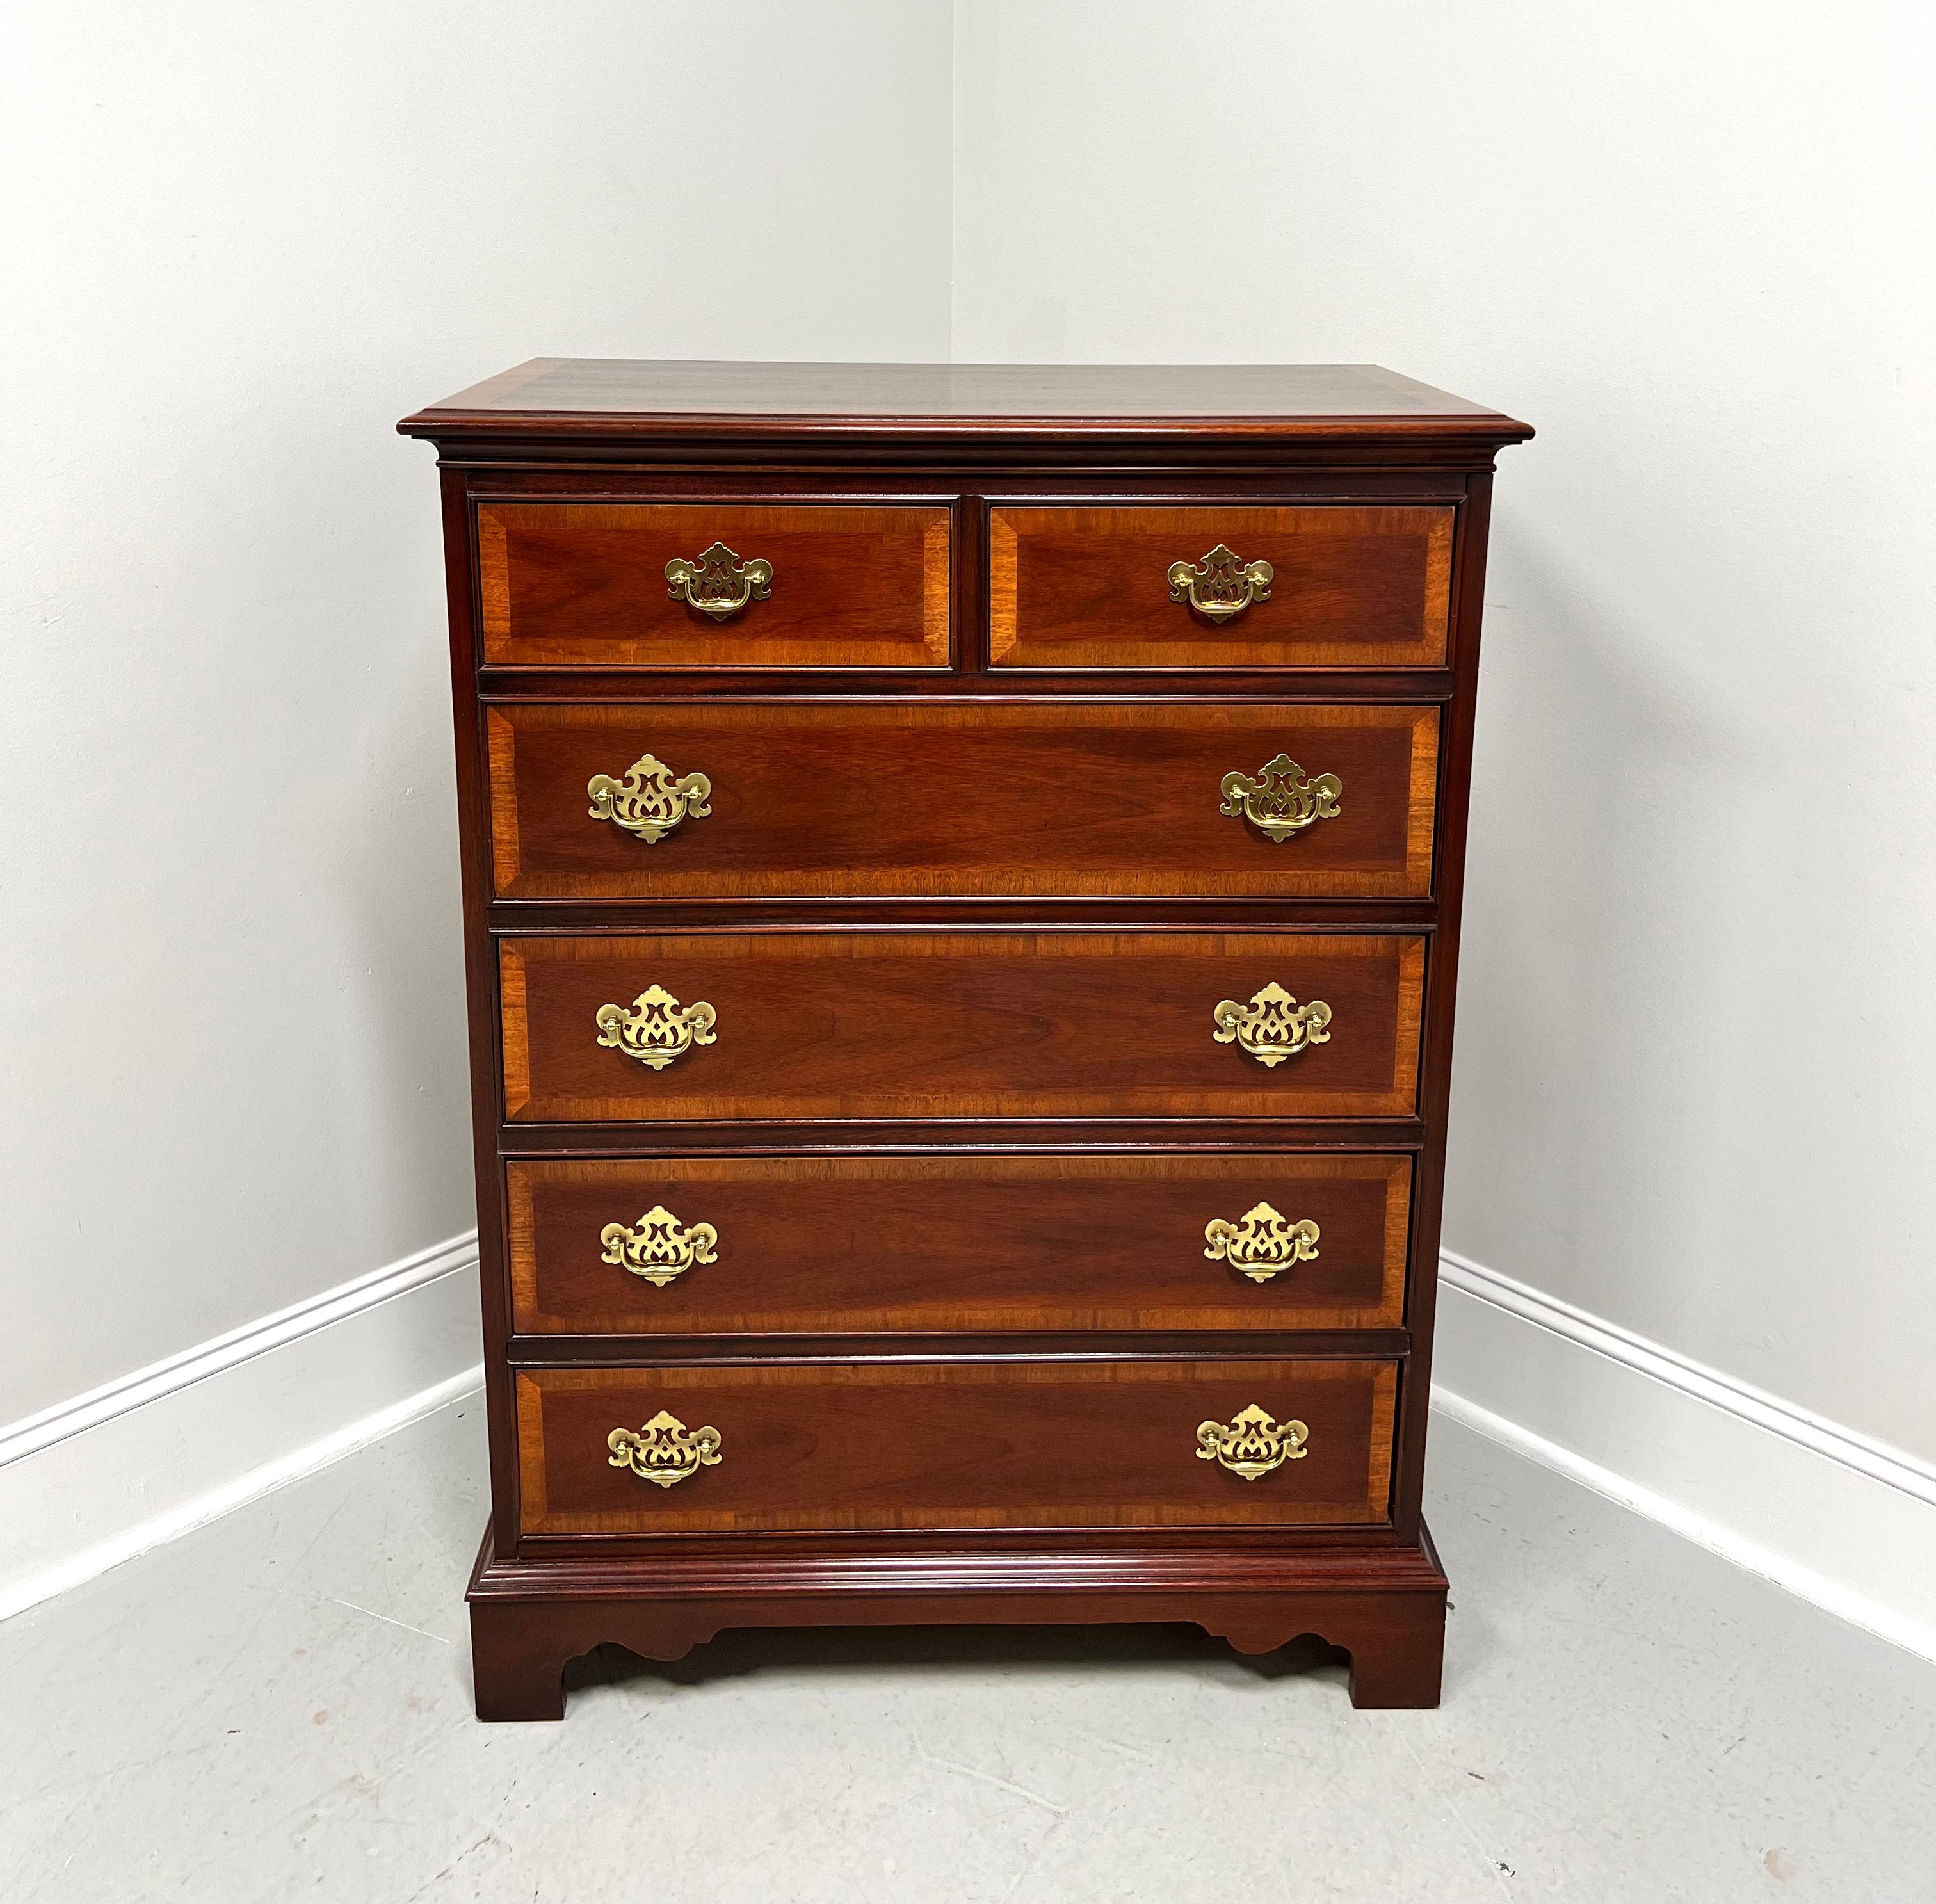 DIXIE Banded Mahogany Chippendale Chest of Six Drawers - B In Good Condition For Sale In Charlotte, NC